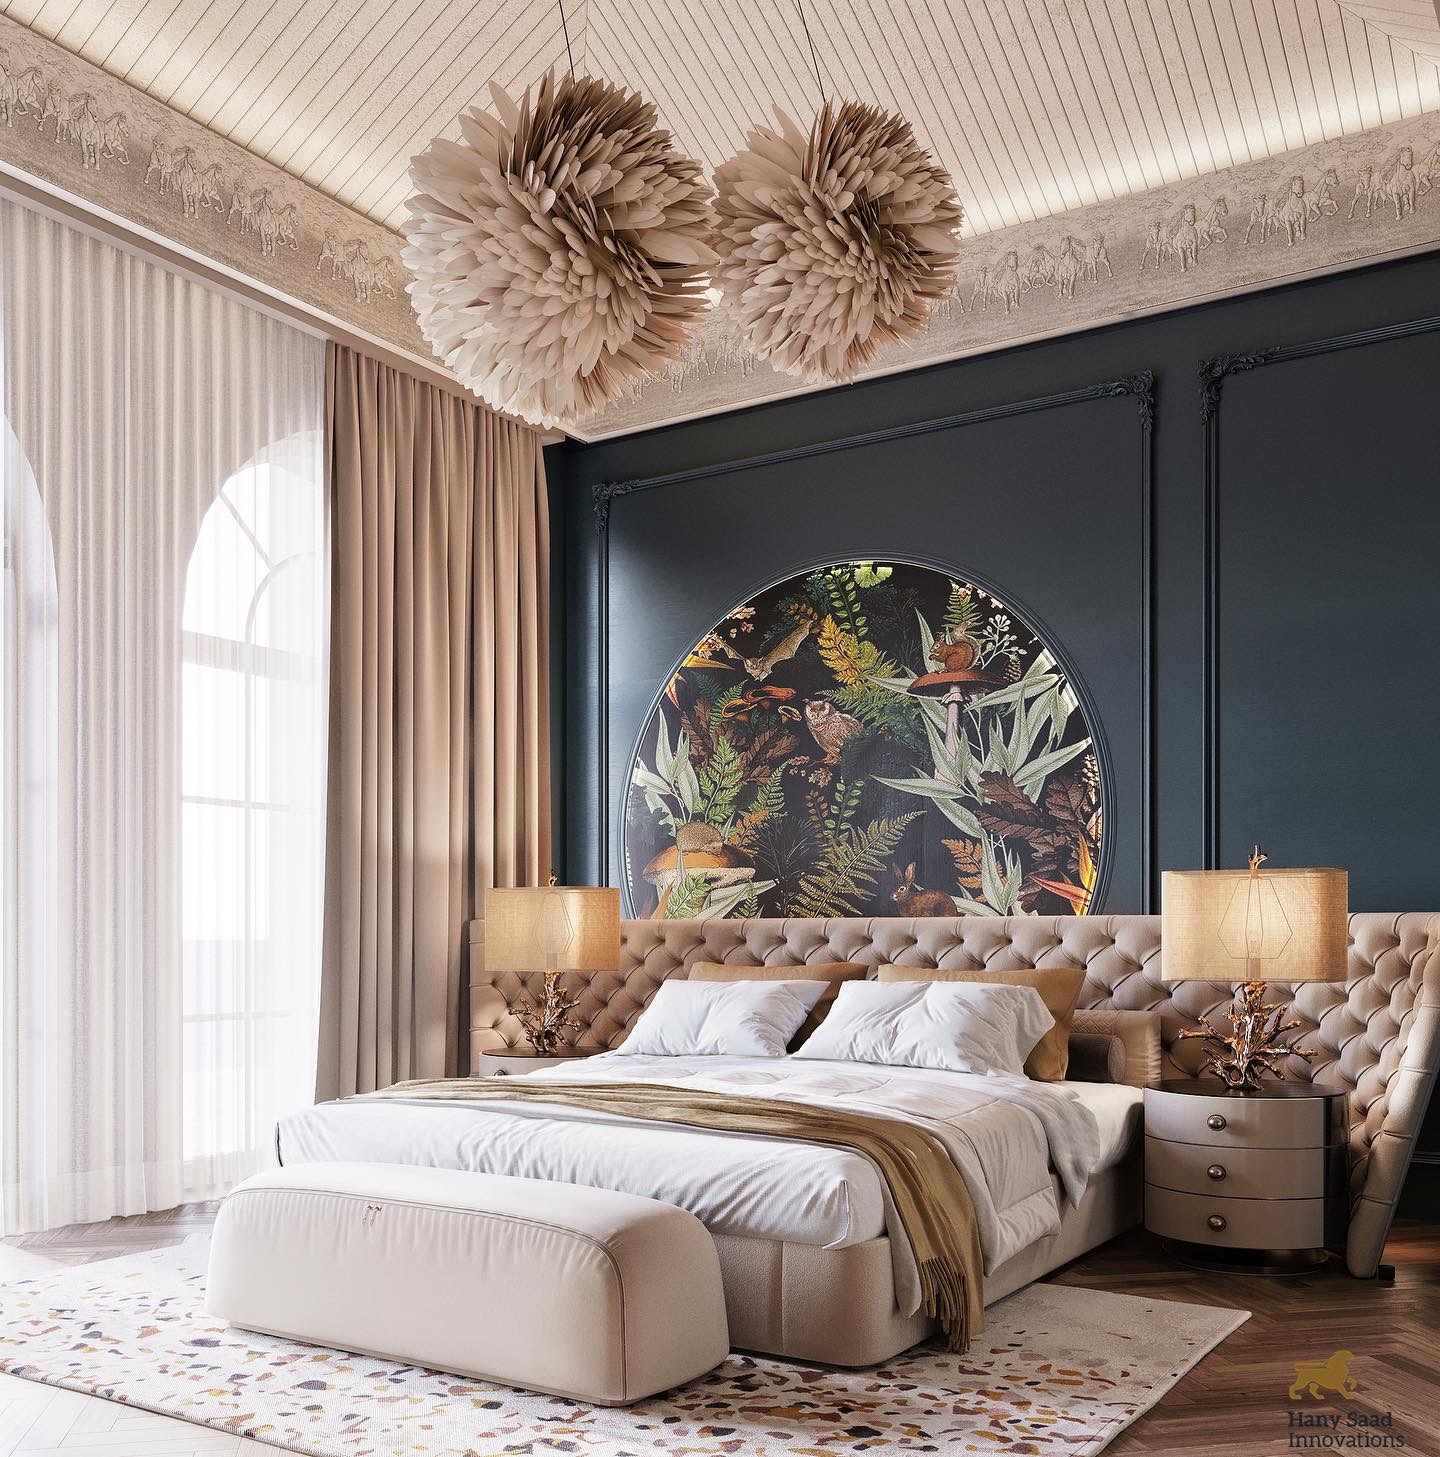 Interior Design Trends For 2023 With New Trend Rooms Ebook. Modern contemporary bedroom with terrazo rug, neutral rug with colorful pattern